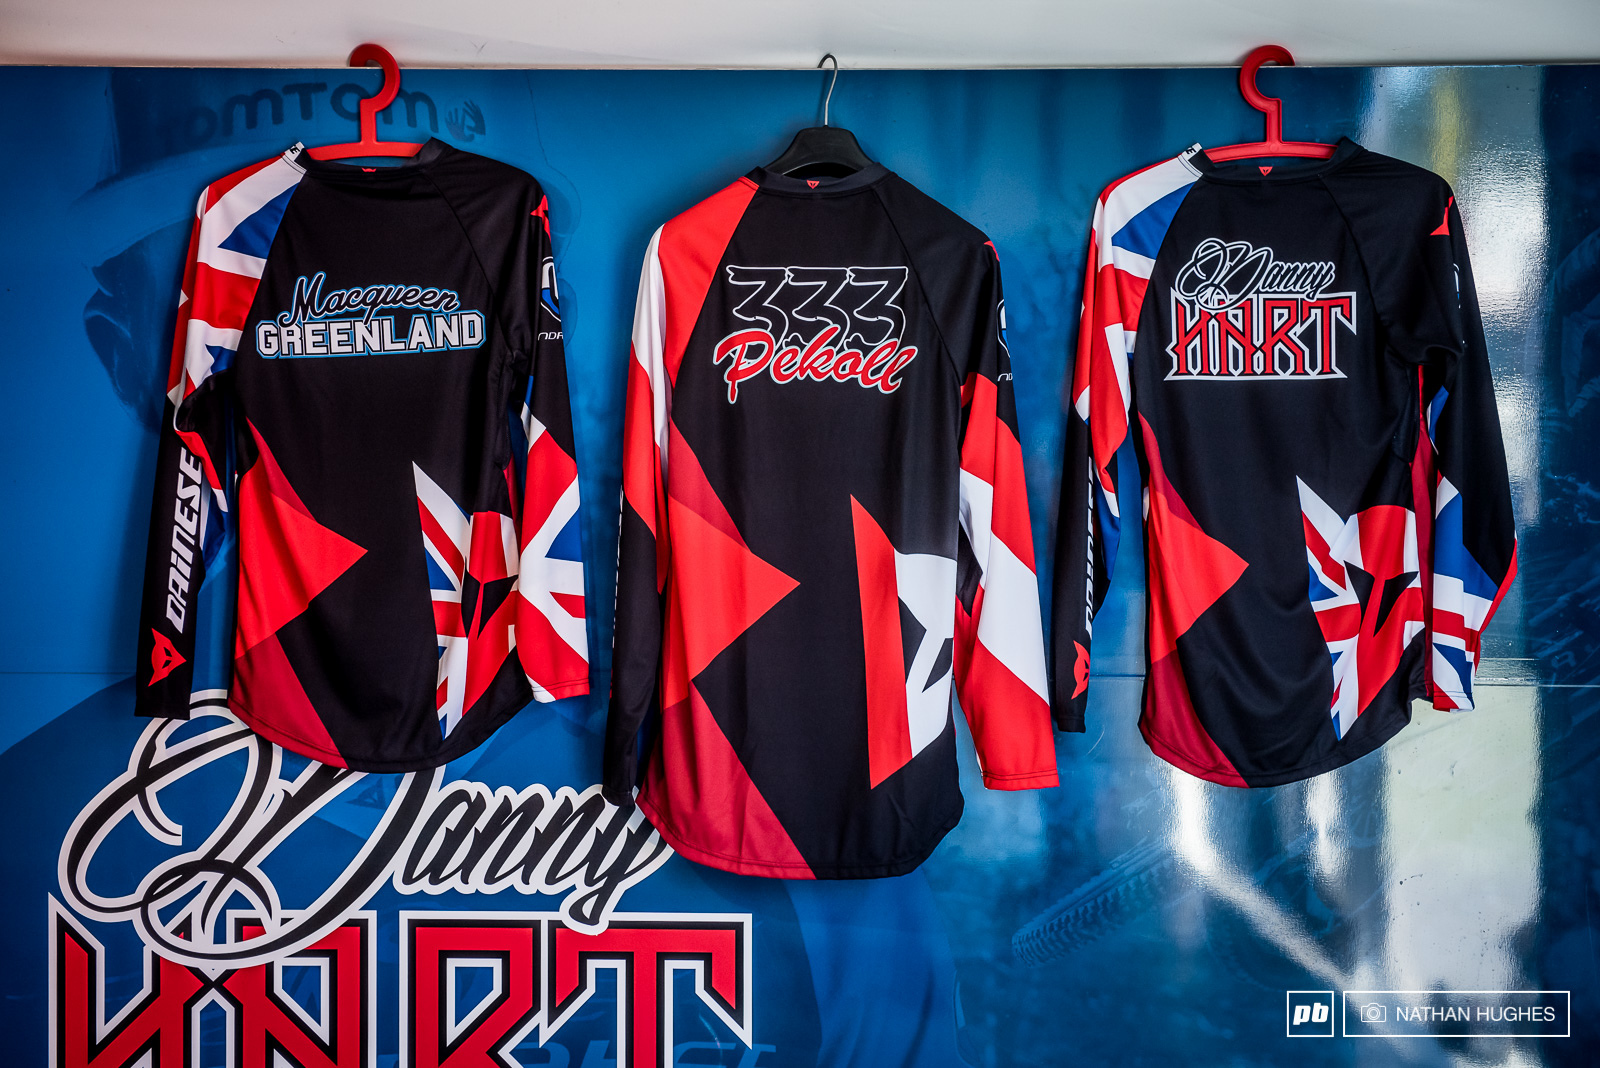 New threads for the fastest team in the World.